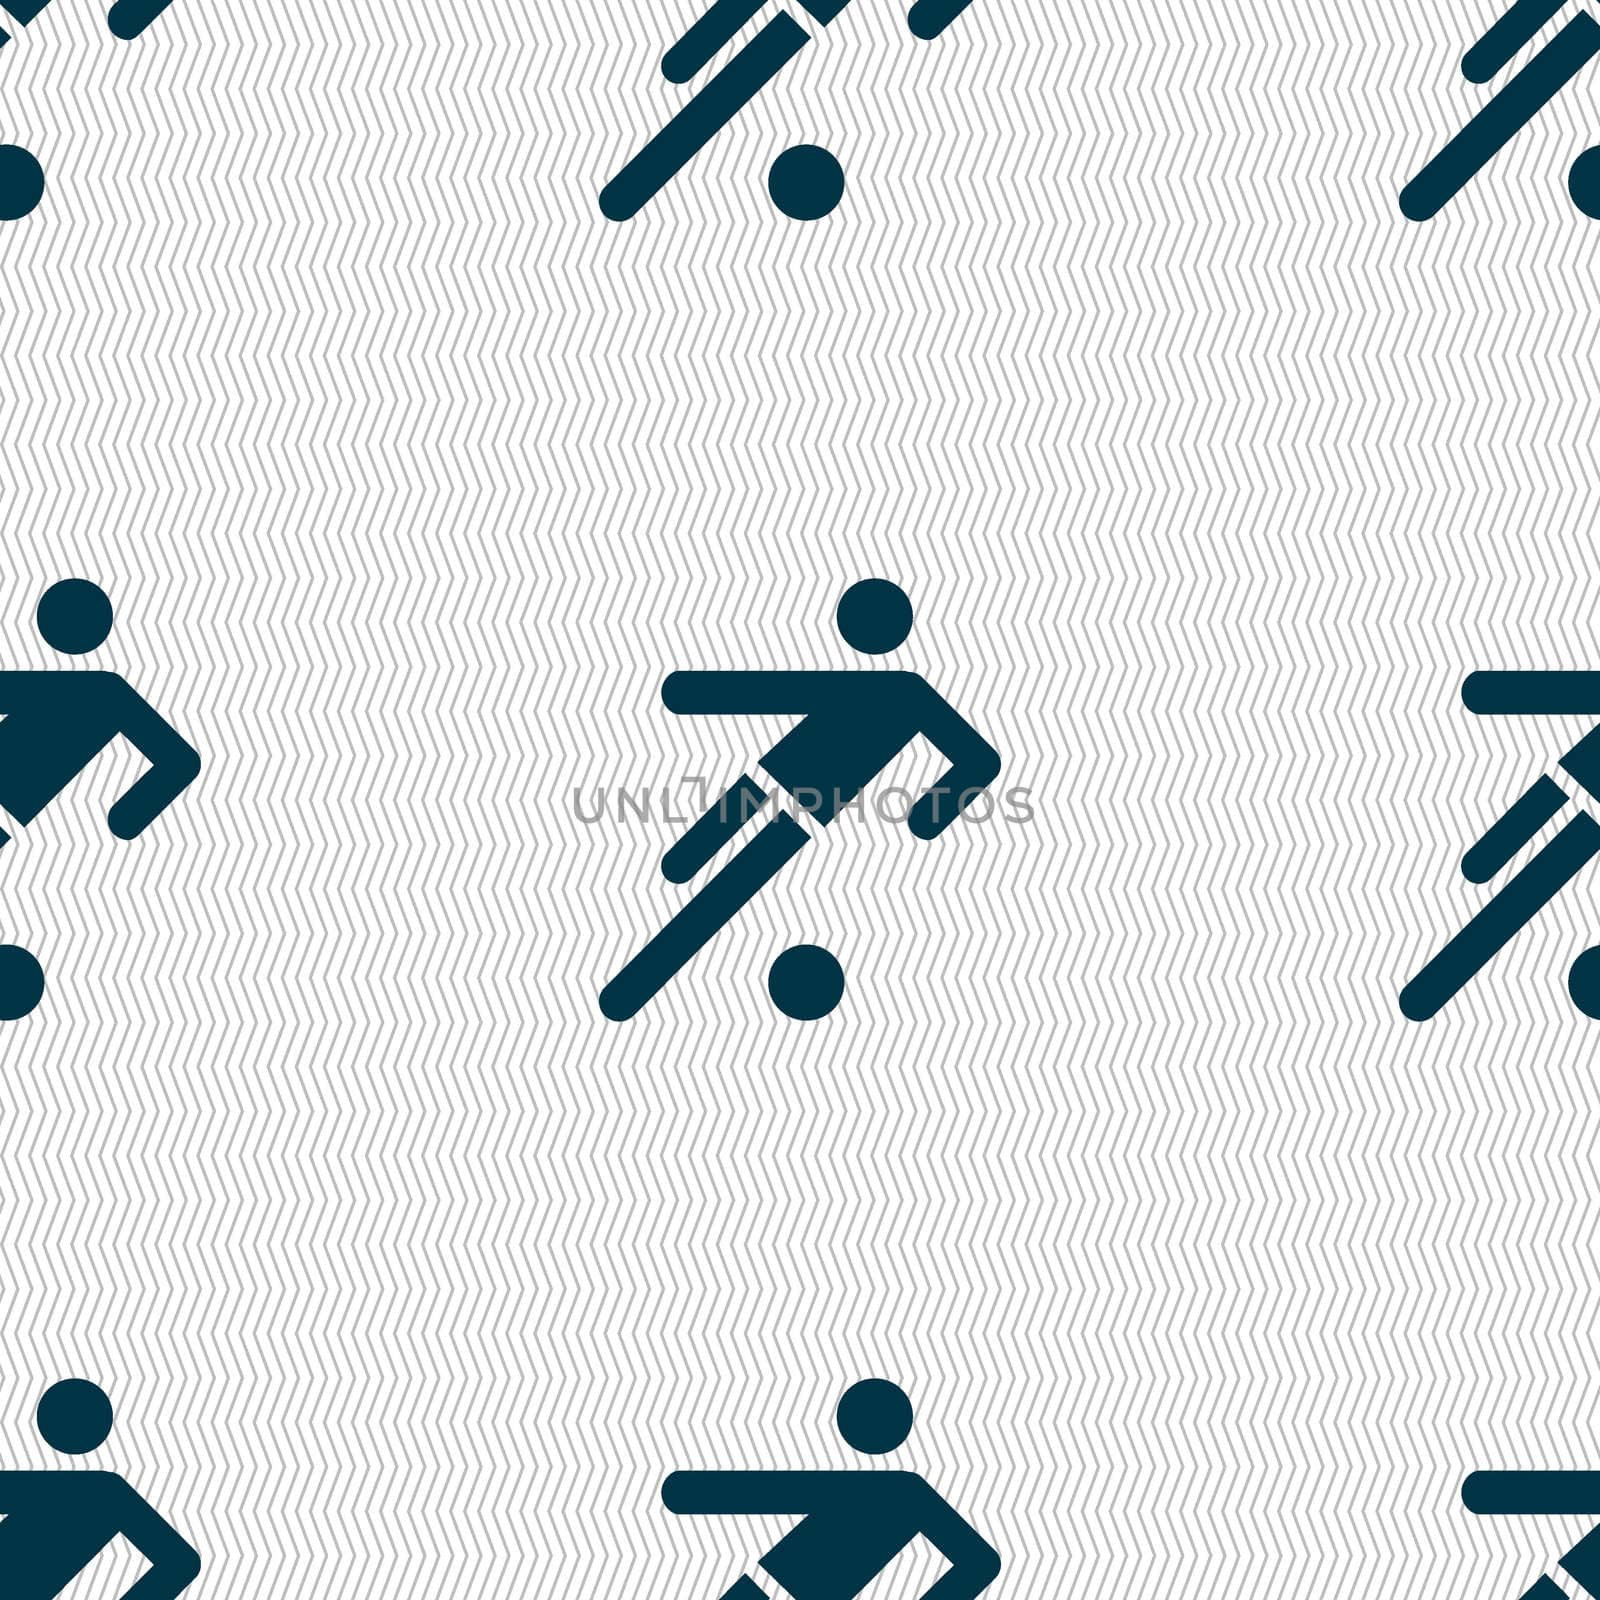 football player icon. Seamless abstract background with geometric shapes. illustration